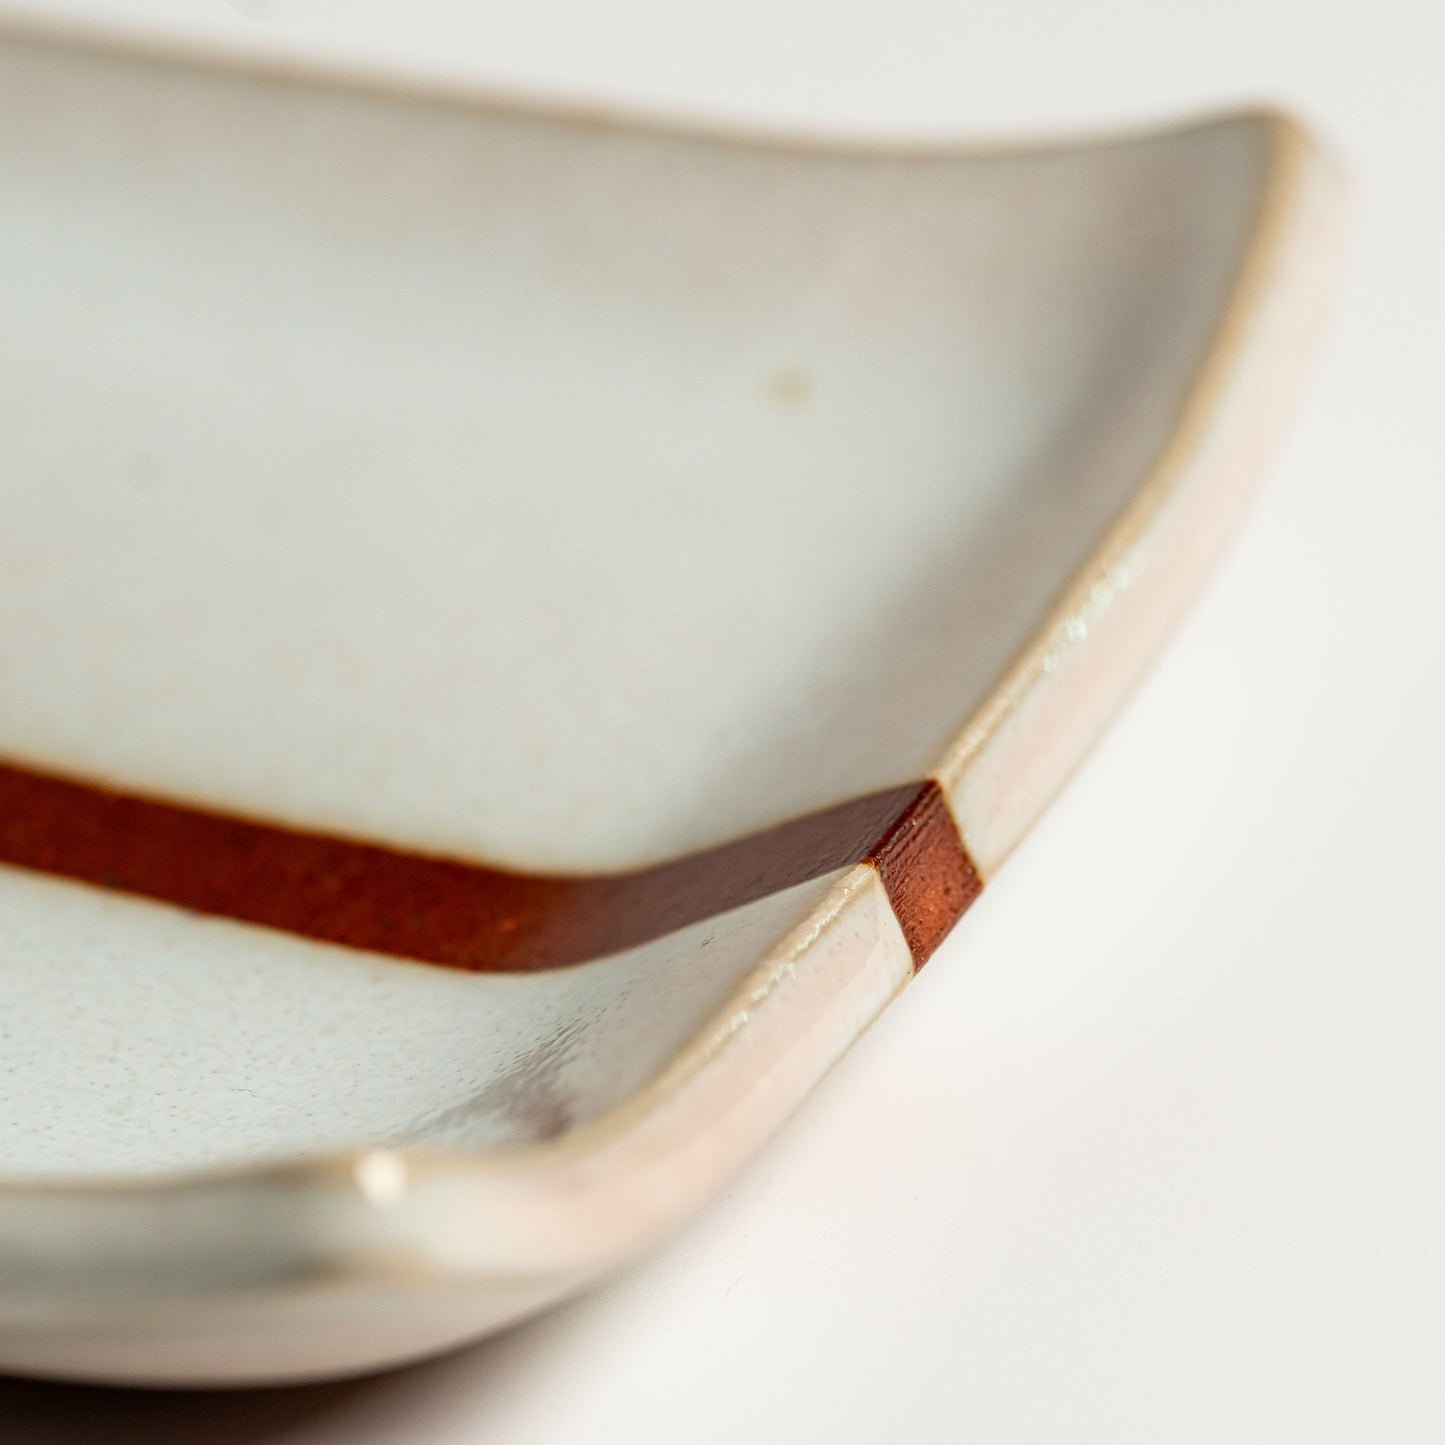 A close up of a white Hagi yaki plate on a white background